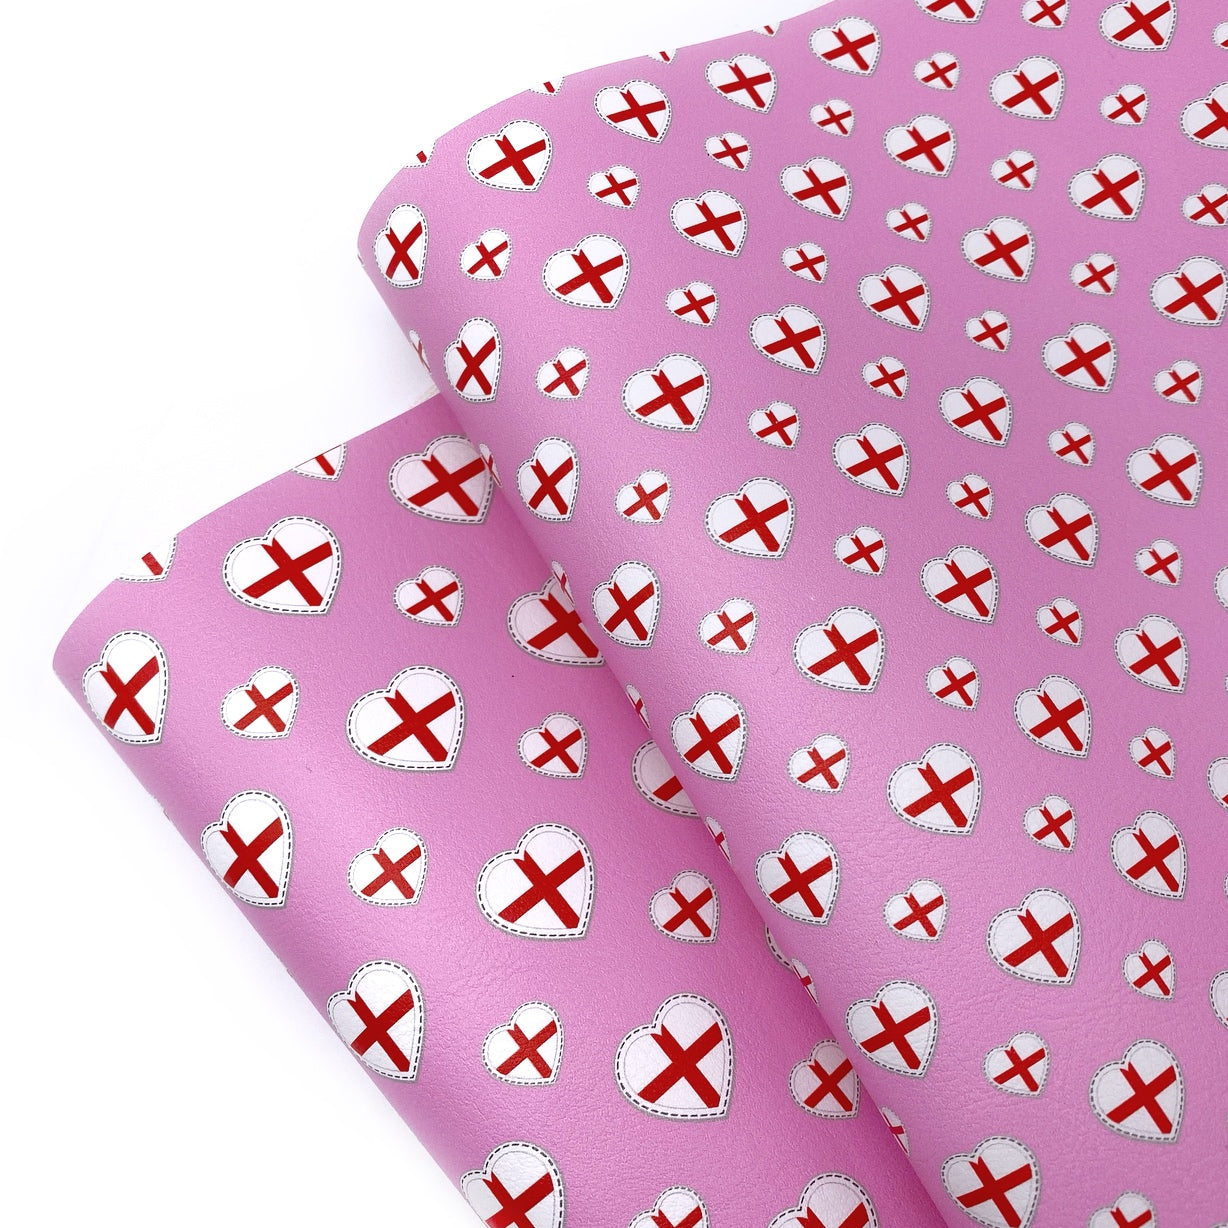 Pink We Love England Premium Faux Leather Fabric Sheets